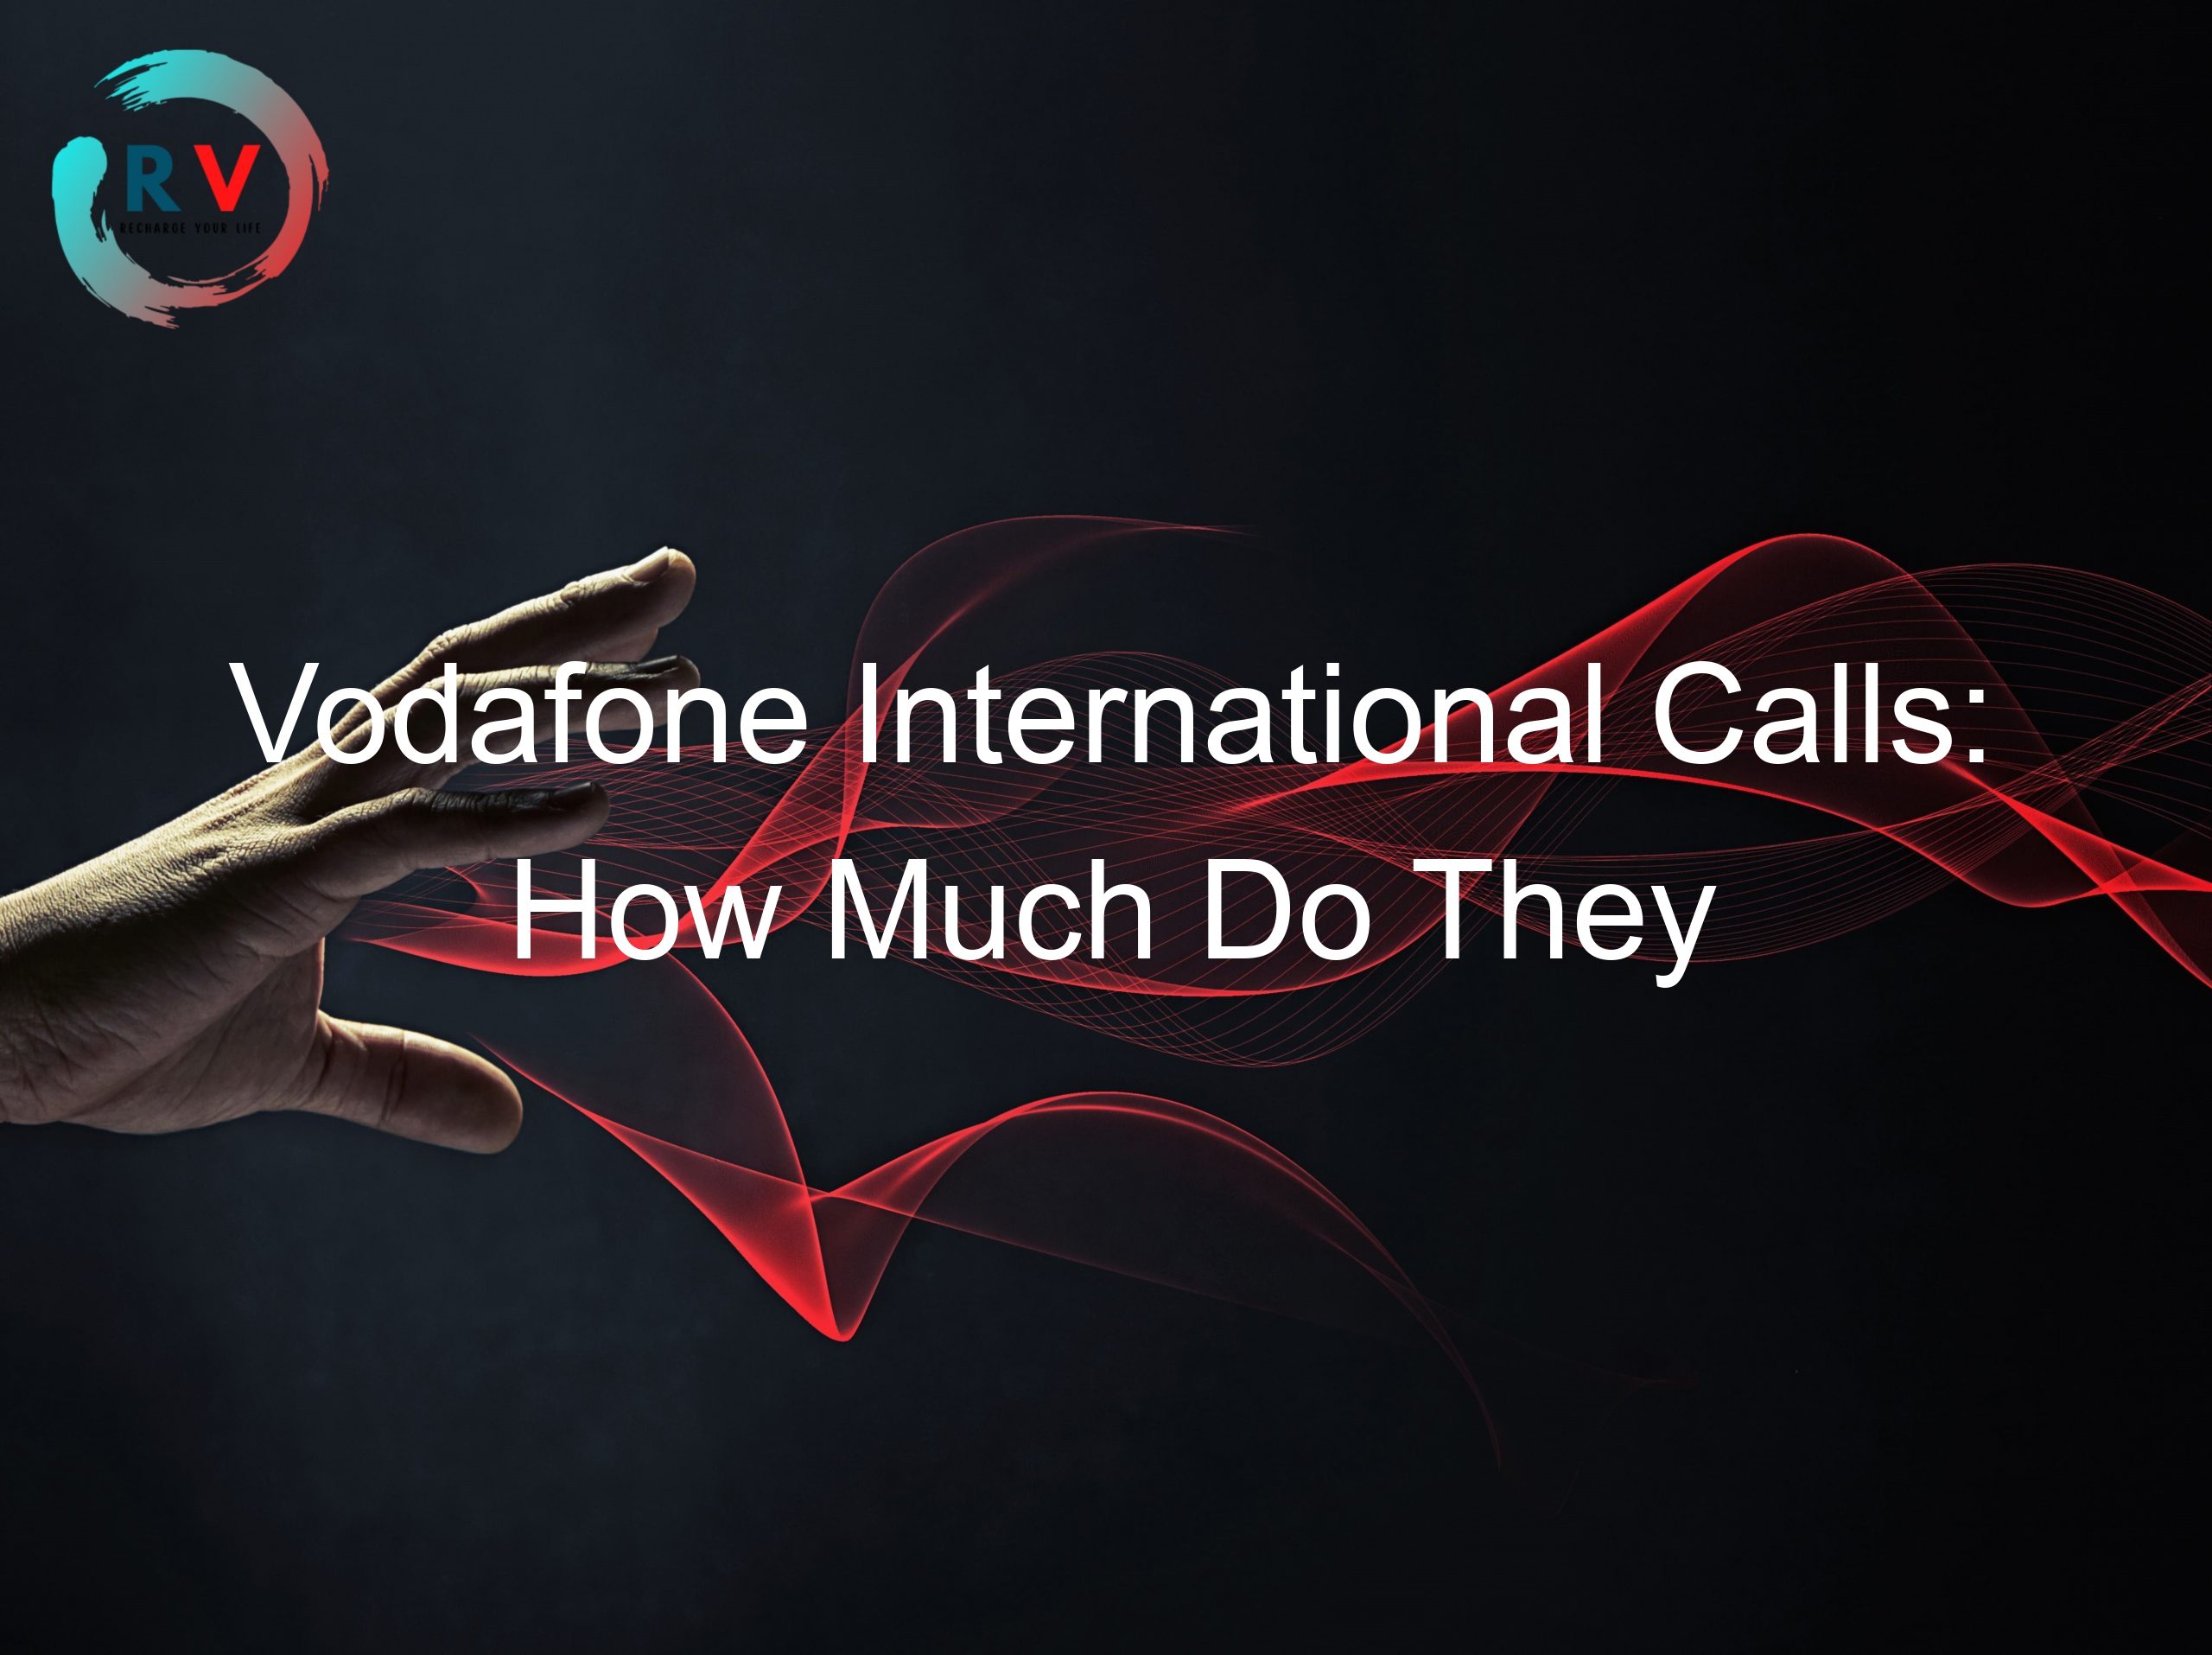 Vodafone International Calls: How Much Do They Cost?